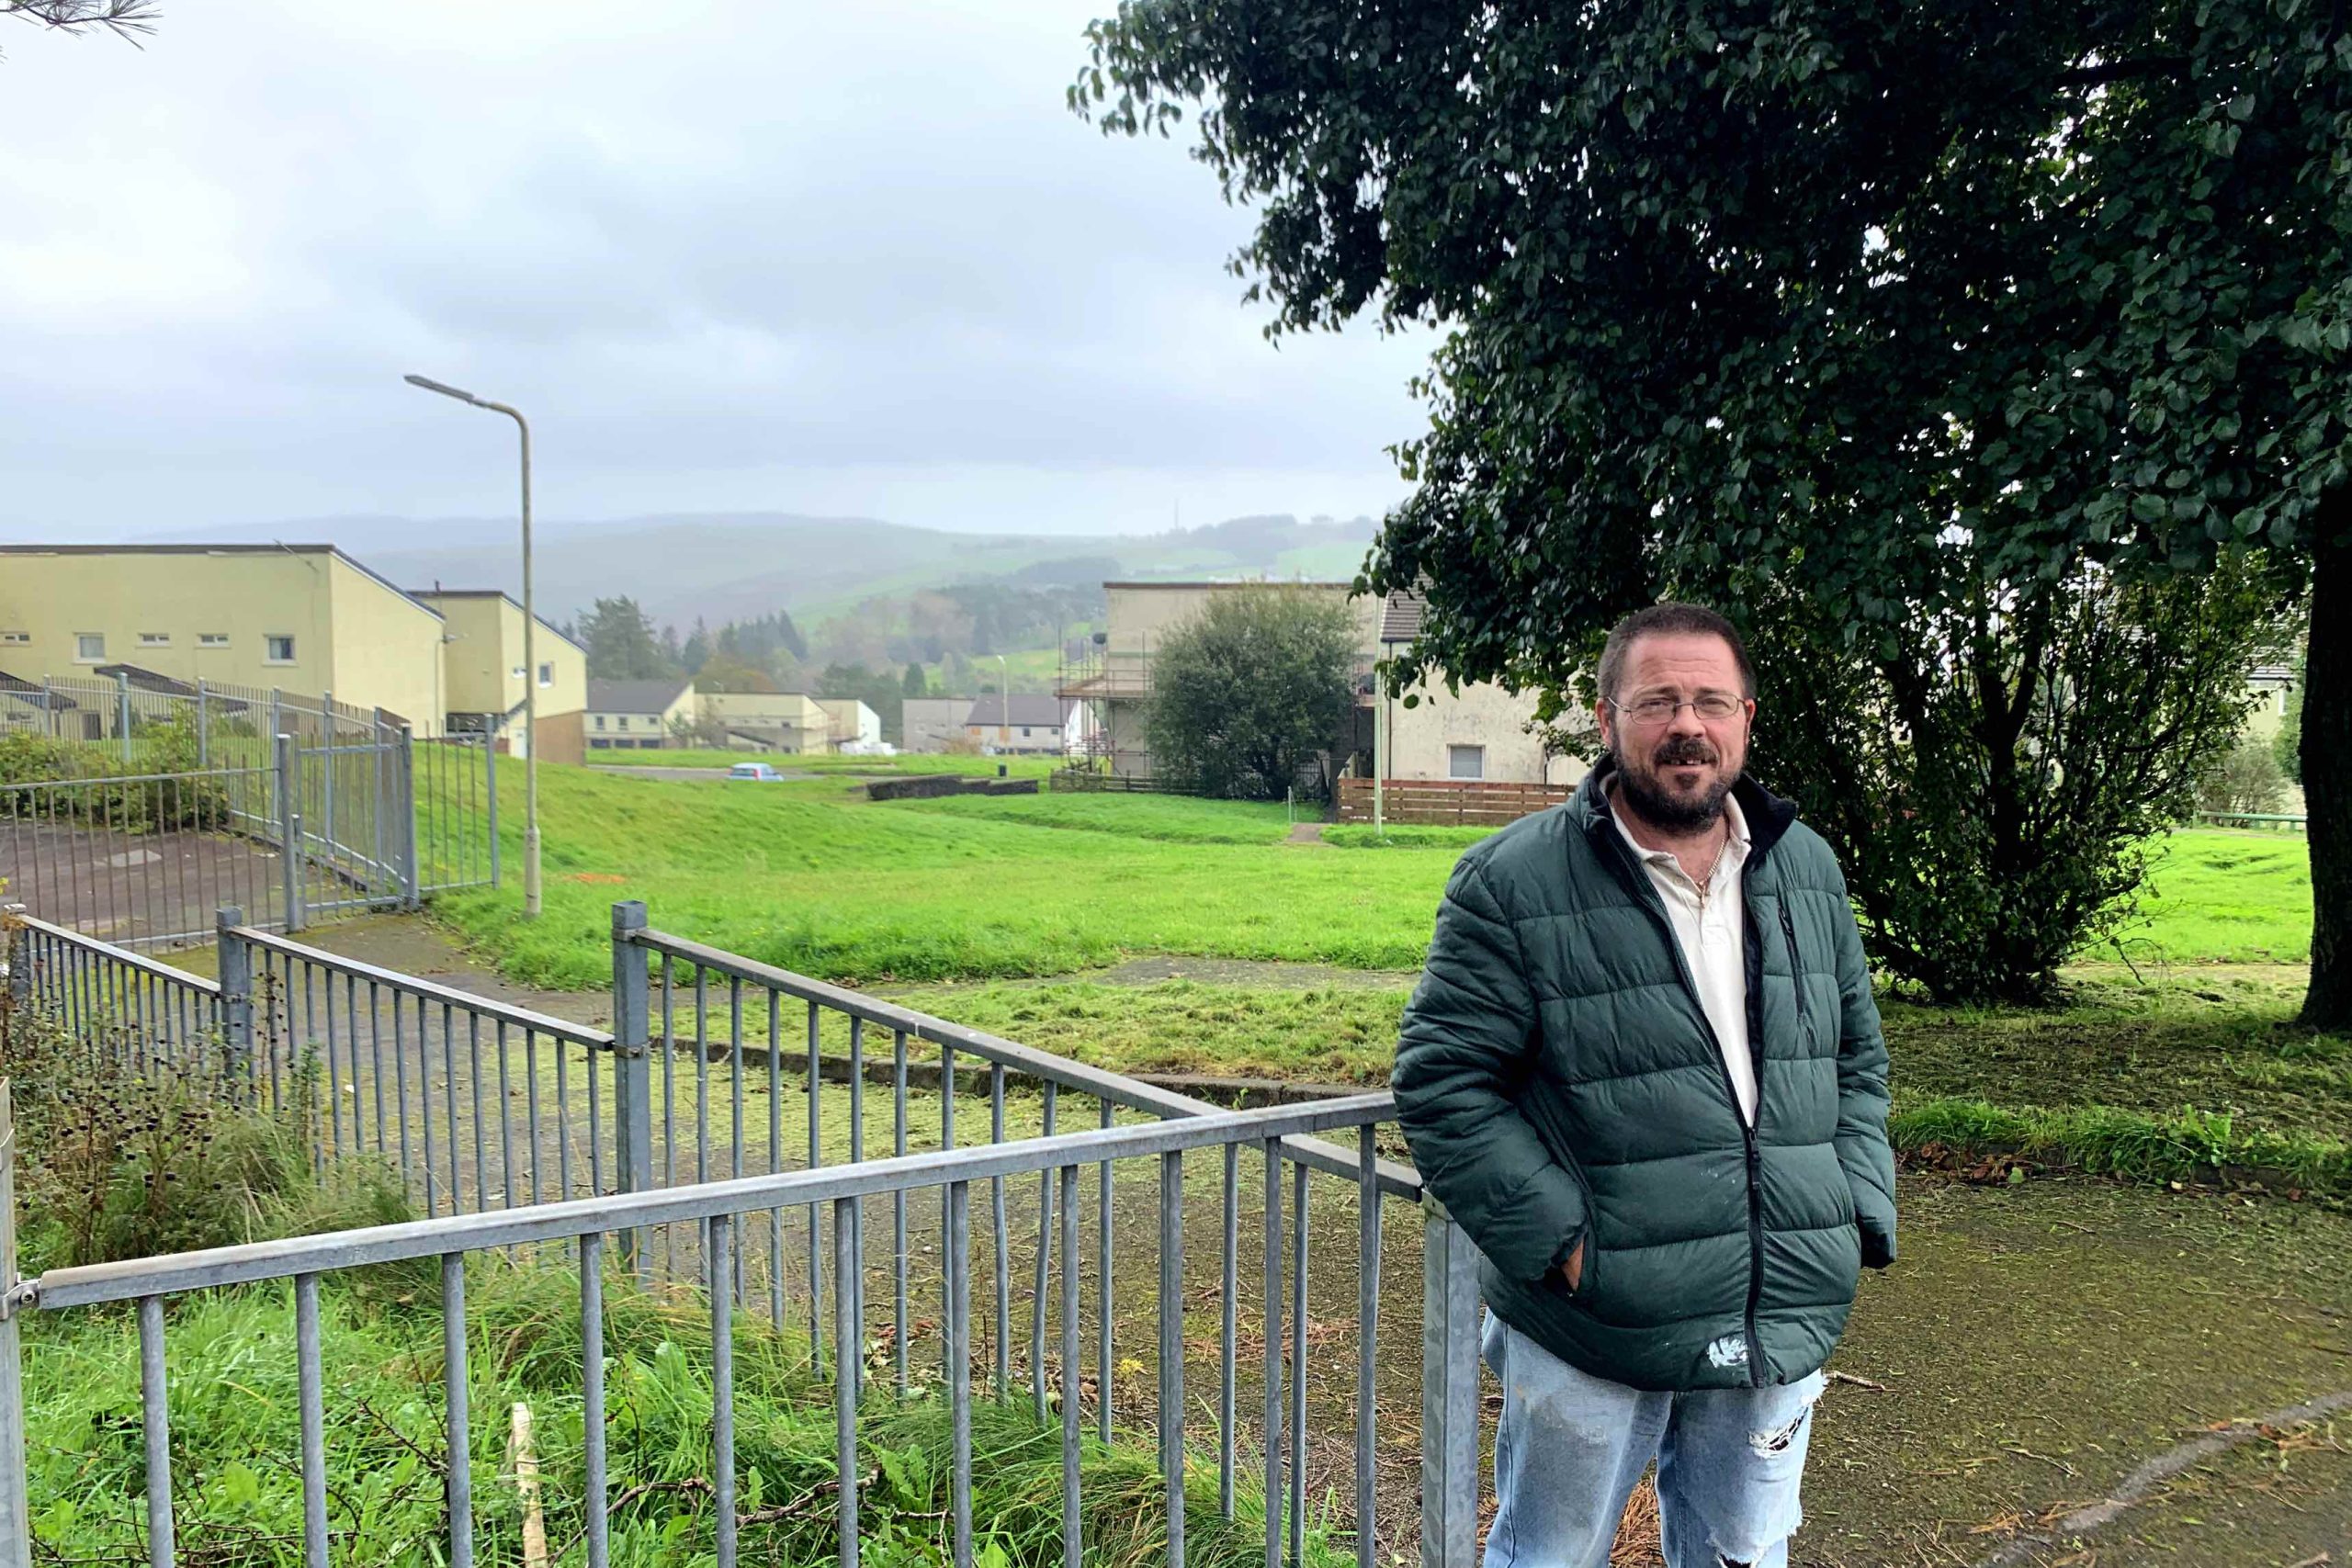 Trivallis Housing Landlord Wales A man stands in front of a metal fence with a Trivallis housing area and green hills in the background, under a cloudy sky.